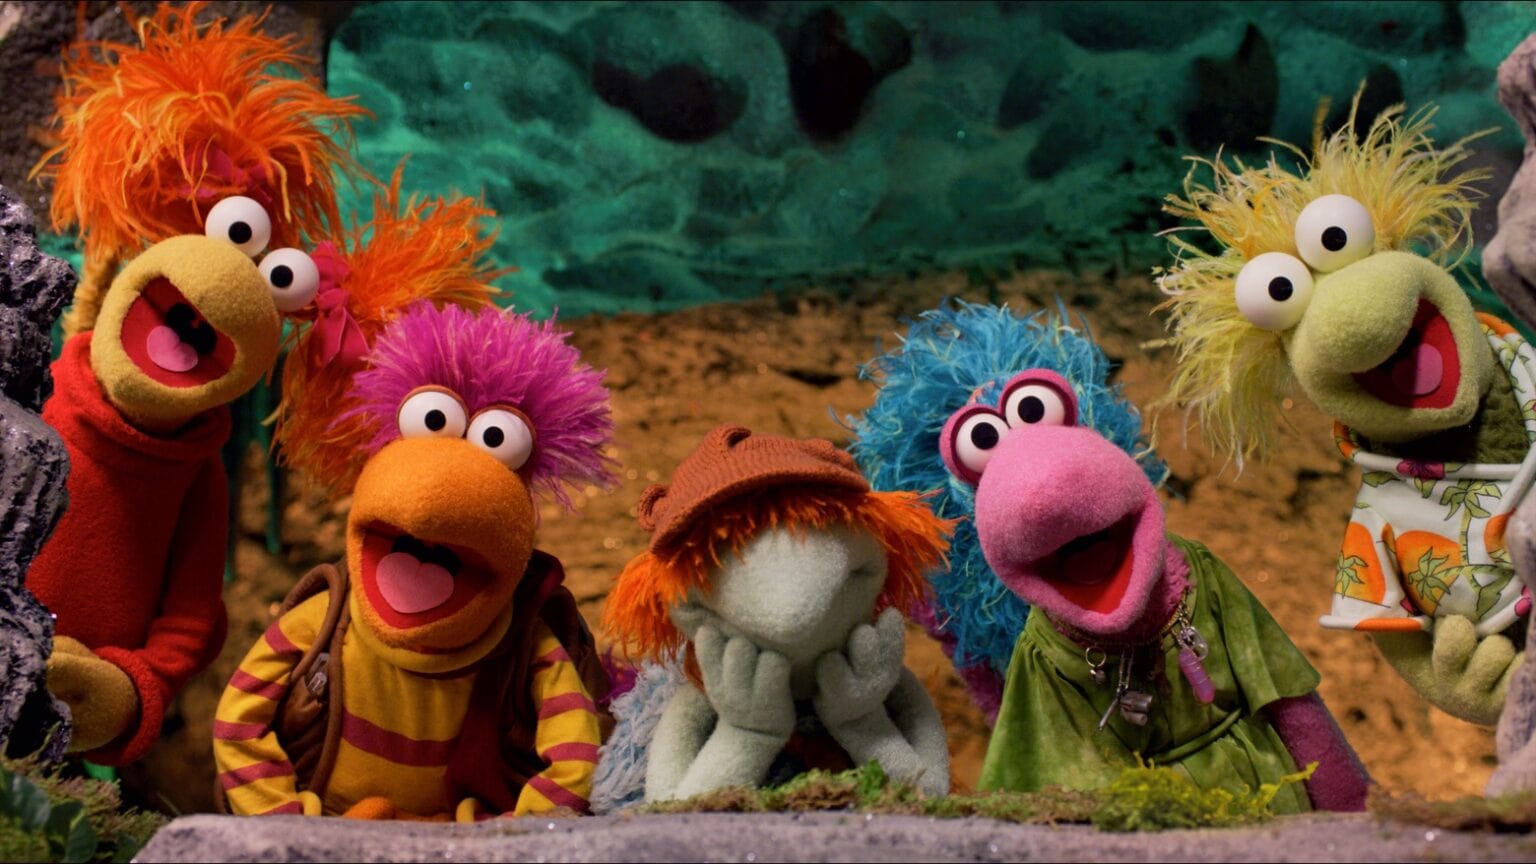 The Fraggles are back! New kids’ series premieres Jan. 21